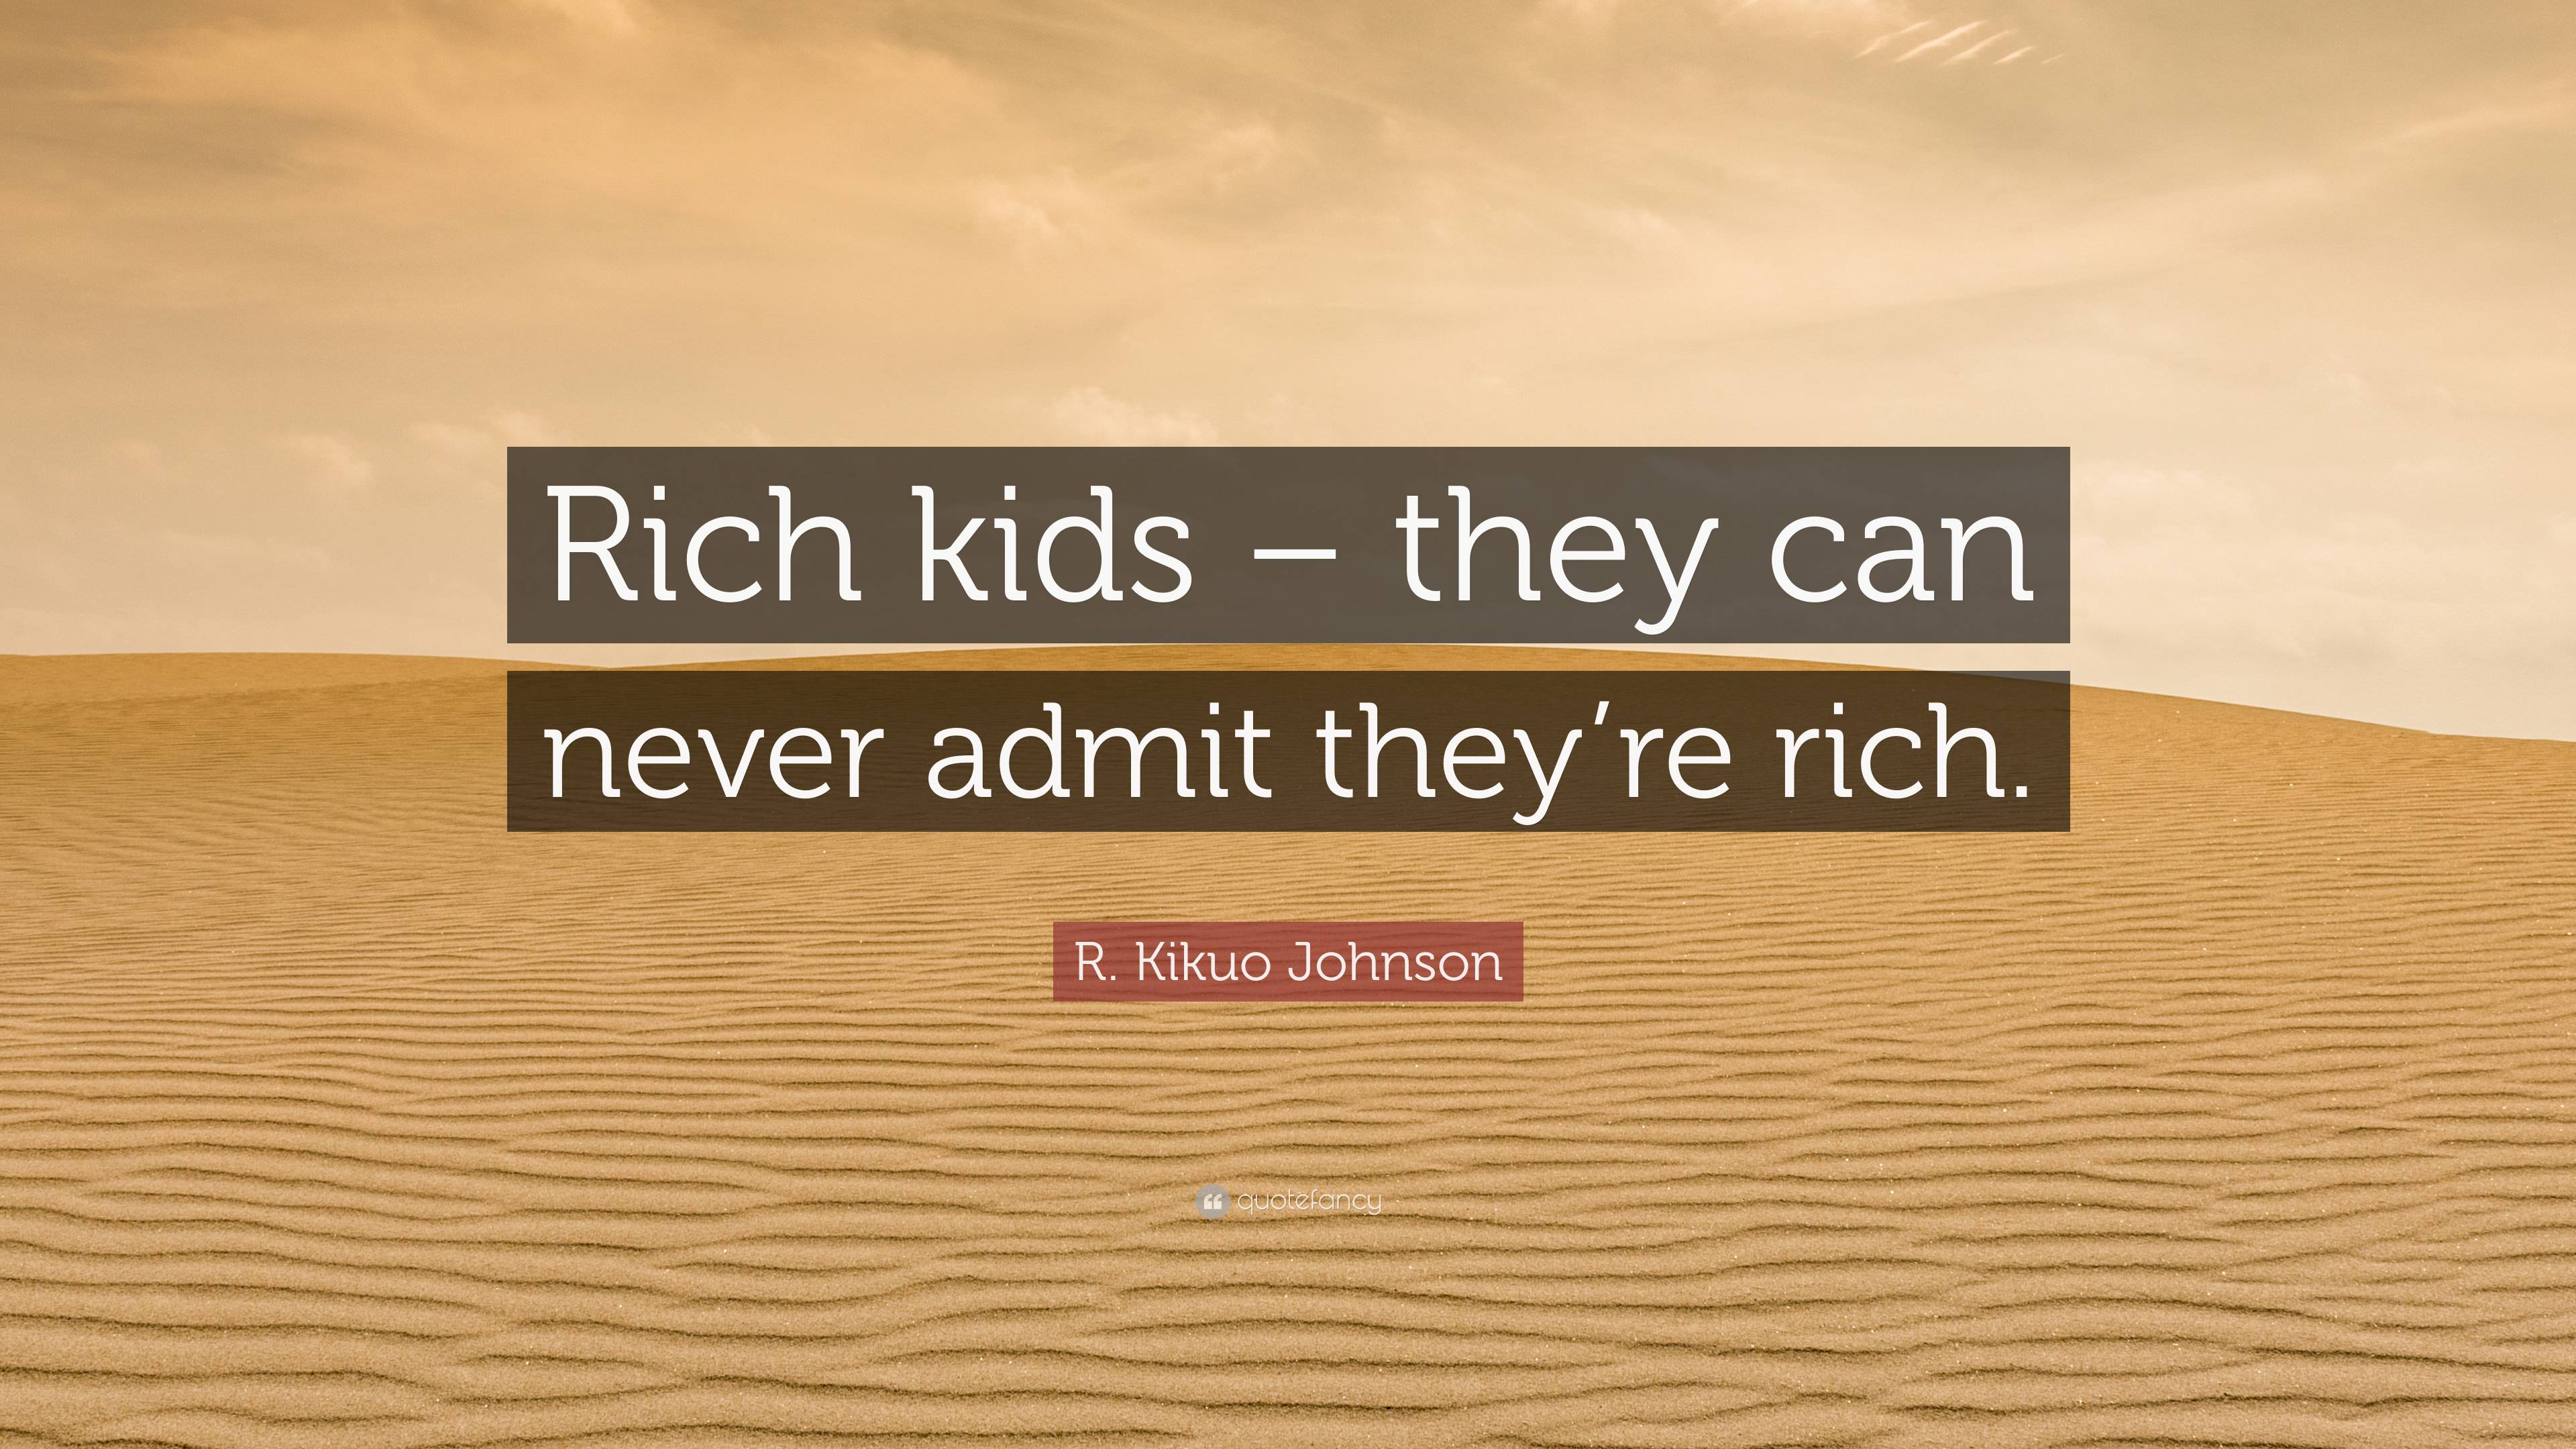 When to Tell the Kids They're Rich